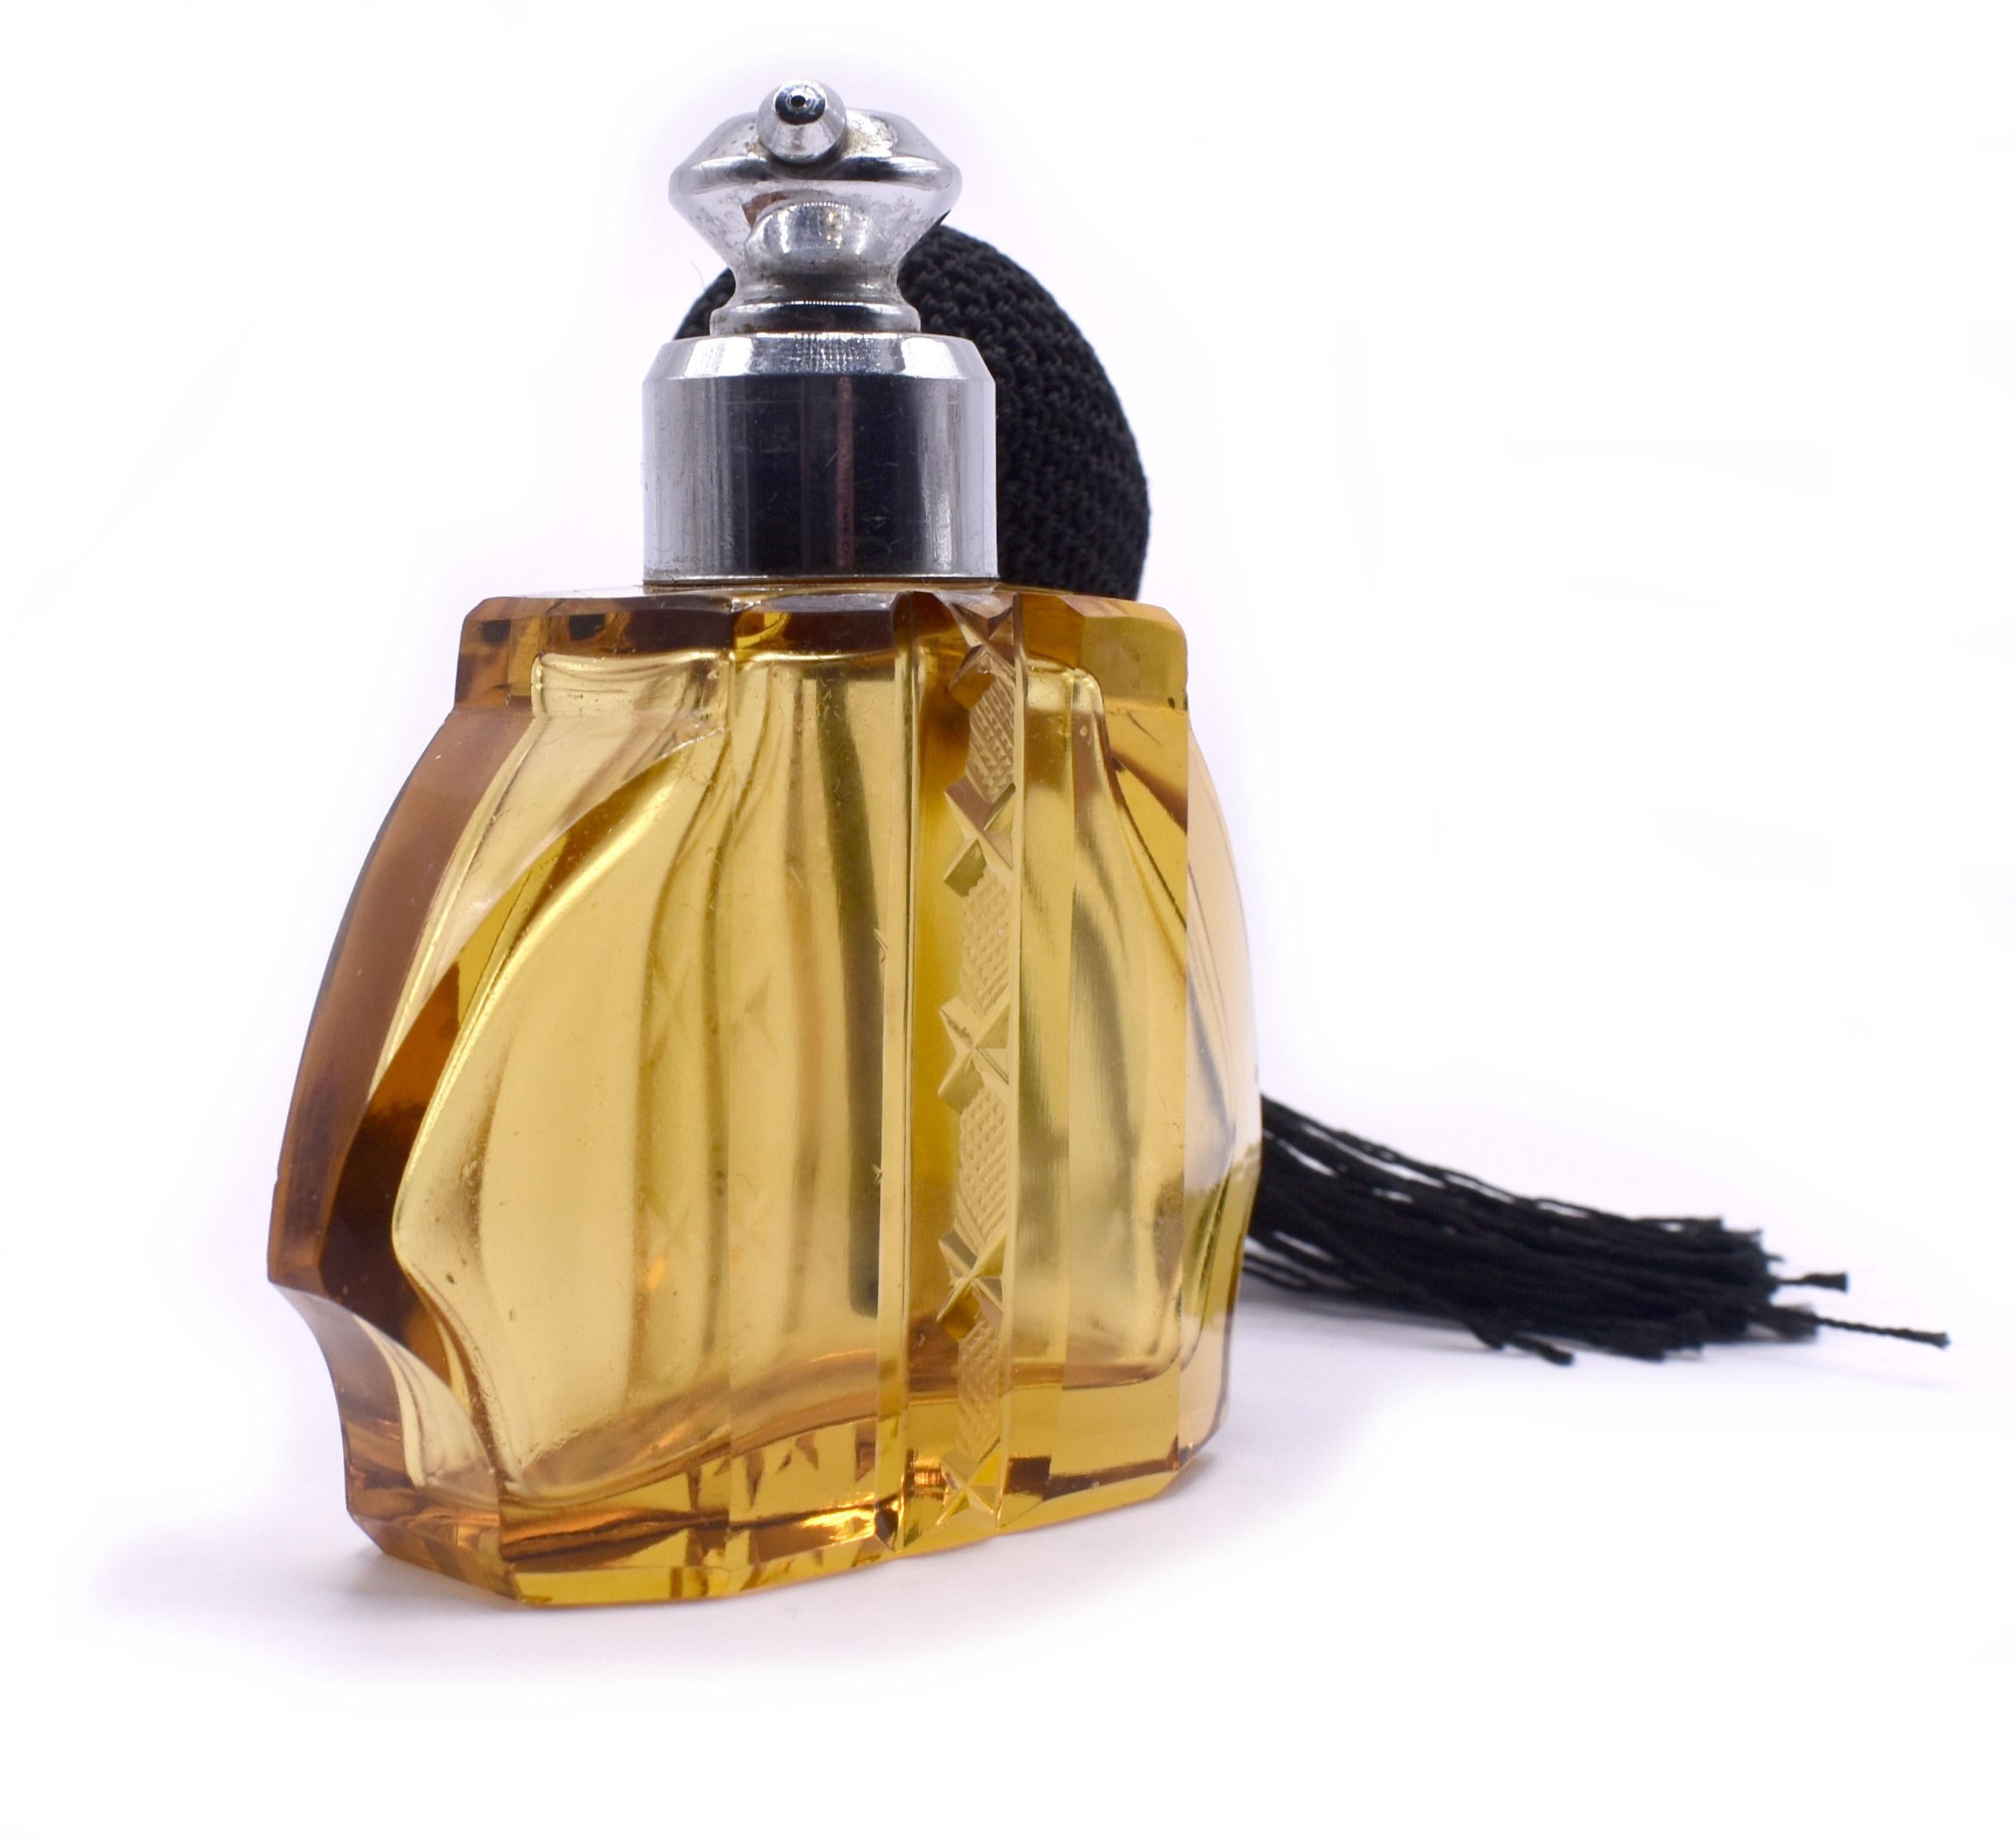 This fabulous Art Deco atomiser is an absolute delight. Cut glass body with multi angled edges is in a beautiful amber colour with black silk bulb and tassel. A perfect addition to a dressing table or bathroom shelf. Excellent vintage condition,